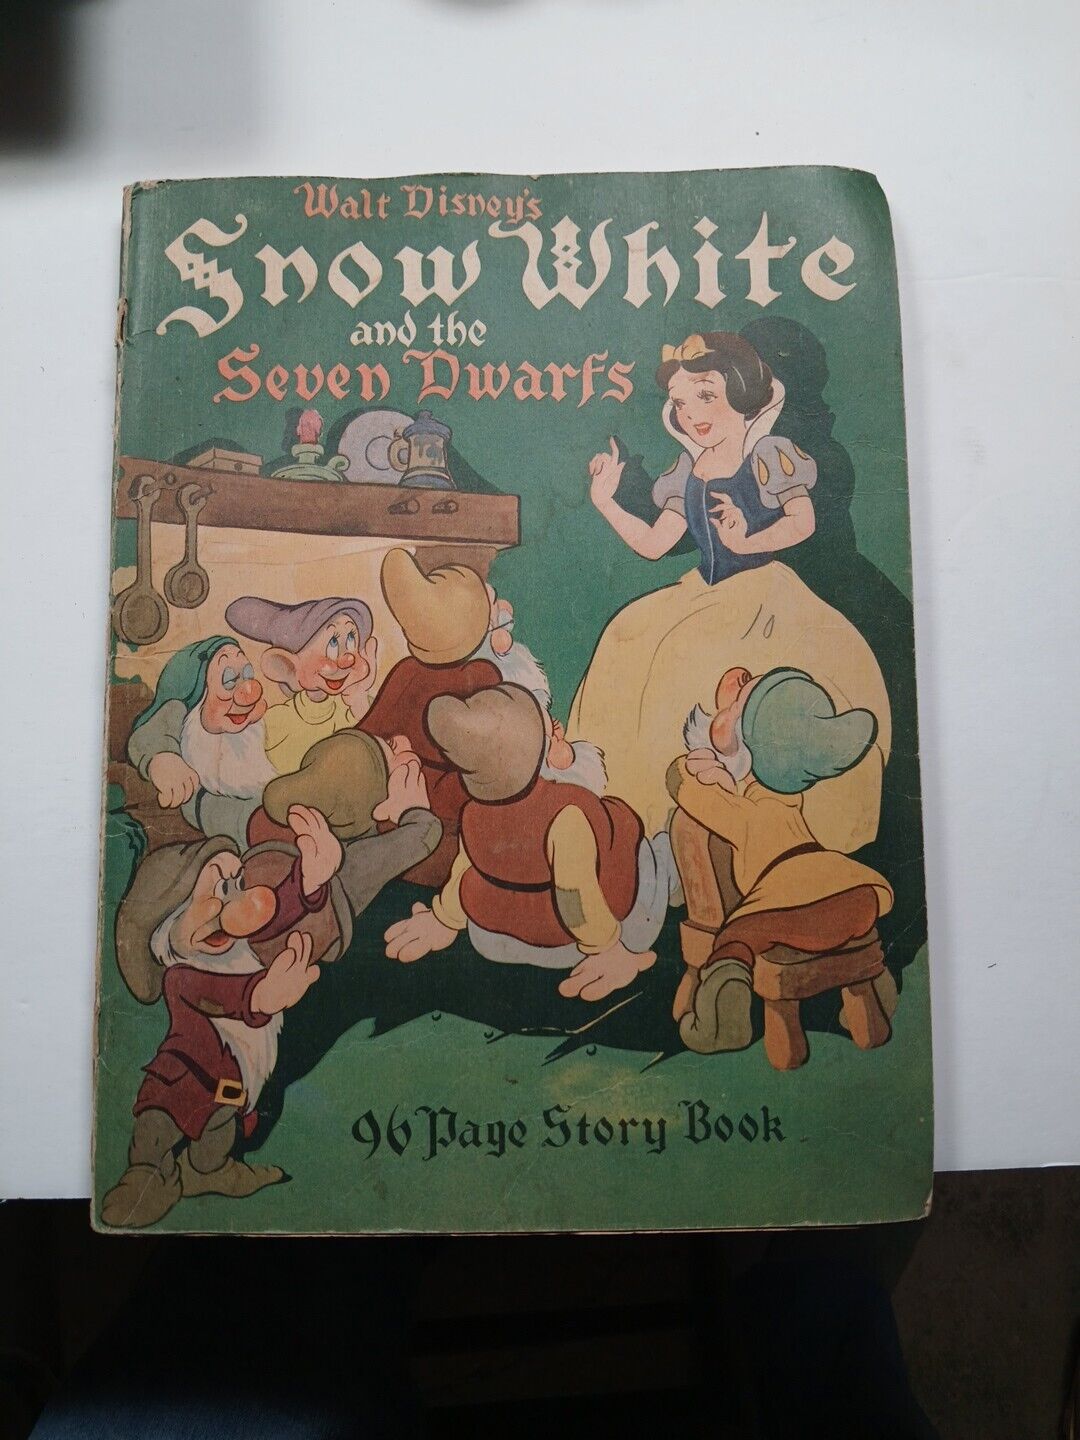 Vintage Walt Disney's Snow White and The Seven Dwarfs 96 Page Storybook 1938